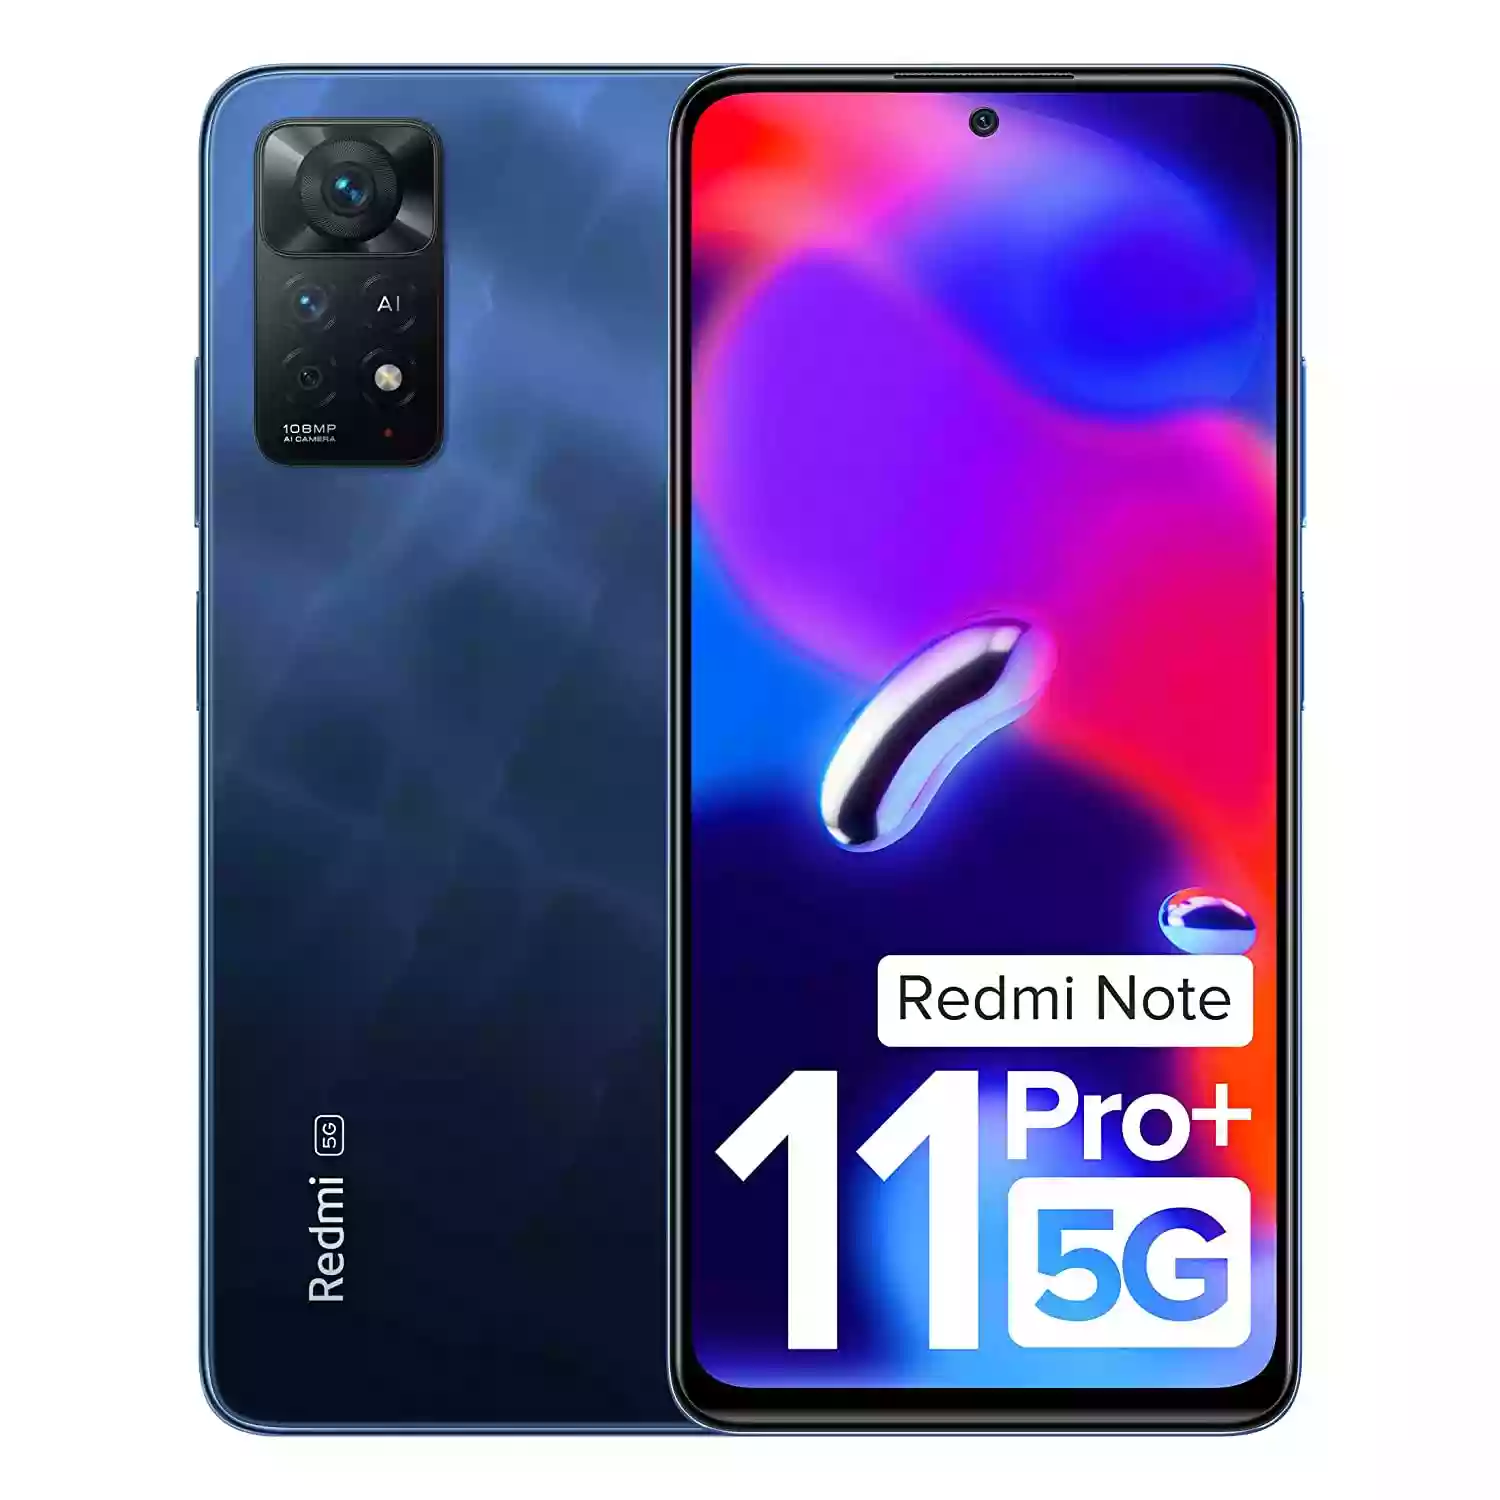 3500 off on Redmi Note 11 pro+ 5g - Federal Bank - One Card